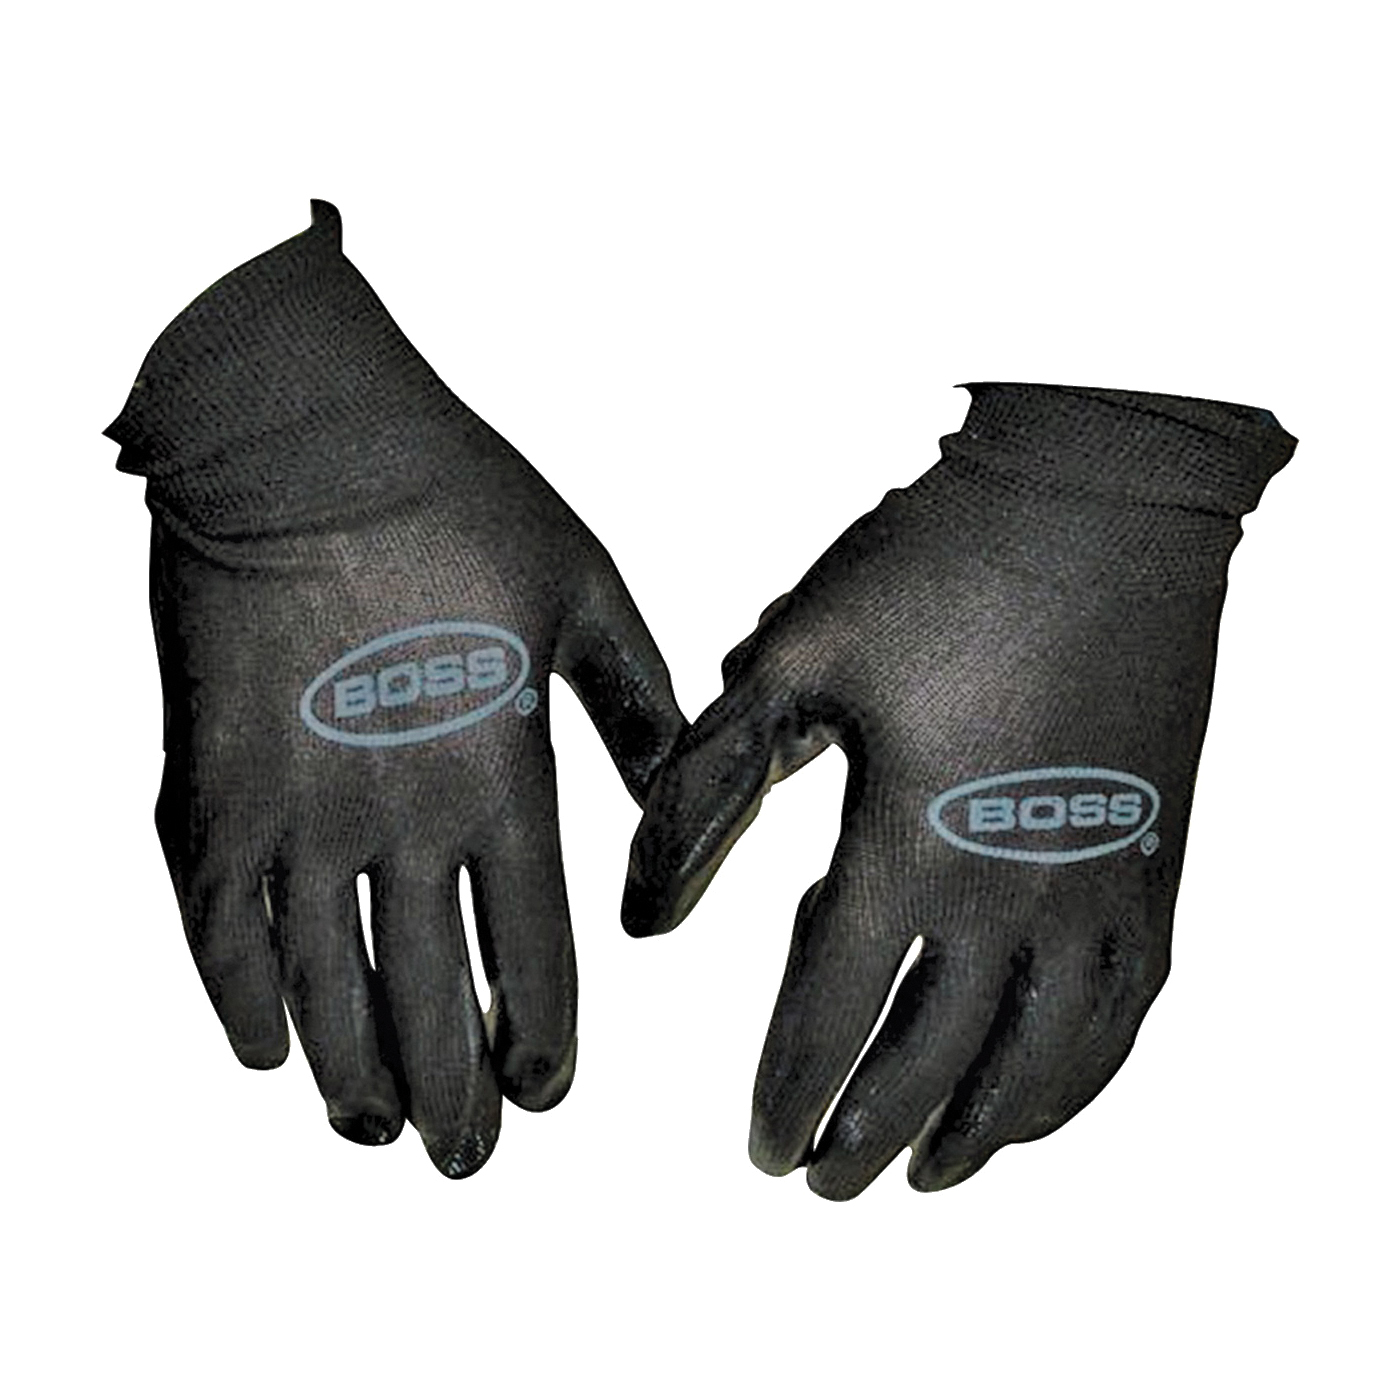 7850N Protective Gloves, Men's, L, Knit Wrist Cuff, Nitrile Coating, Polyester Glove